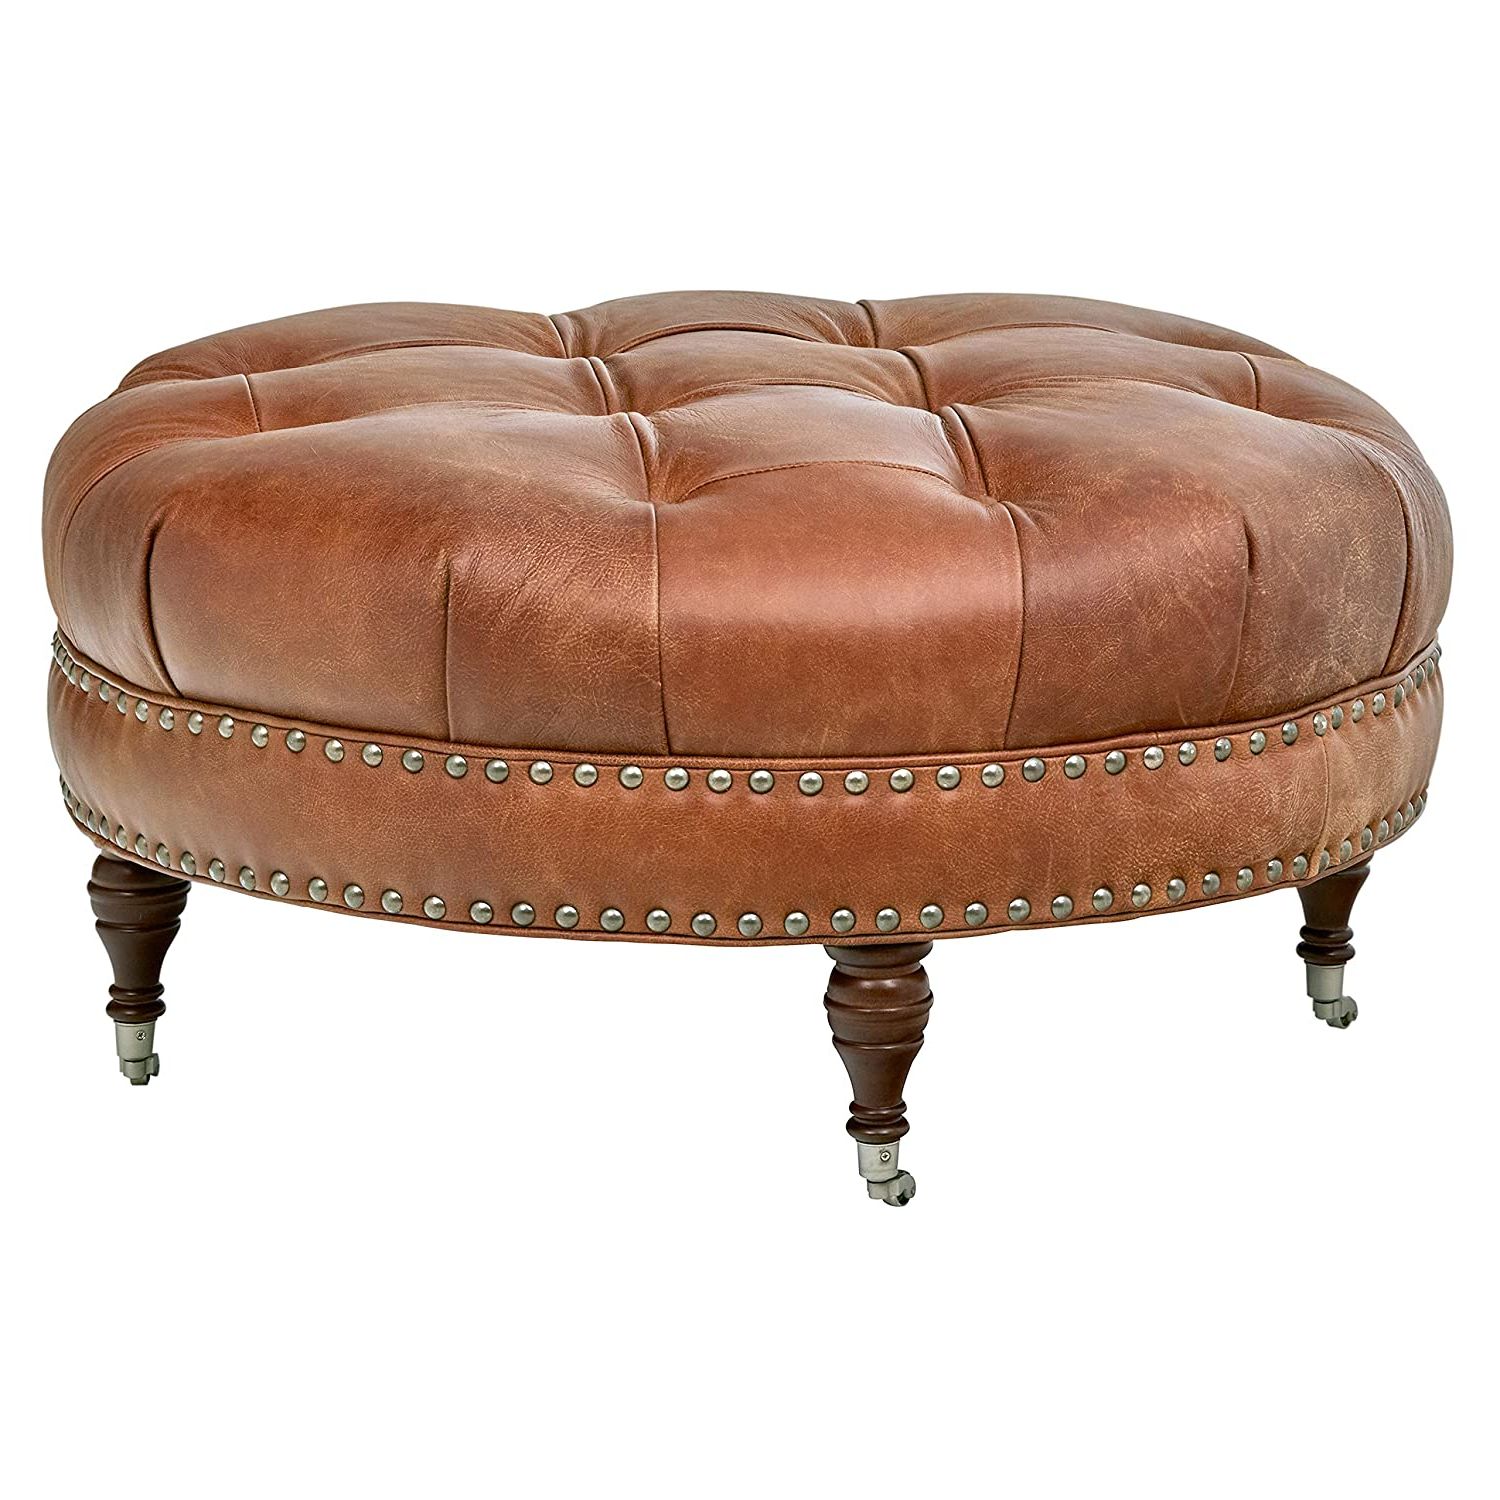 Brown And Ivory Leather Hide Round Ottomans In Fashionable Best Leather Round Pouf Ottoman – Your House (View 6 of 10)